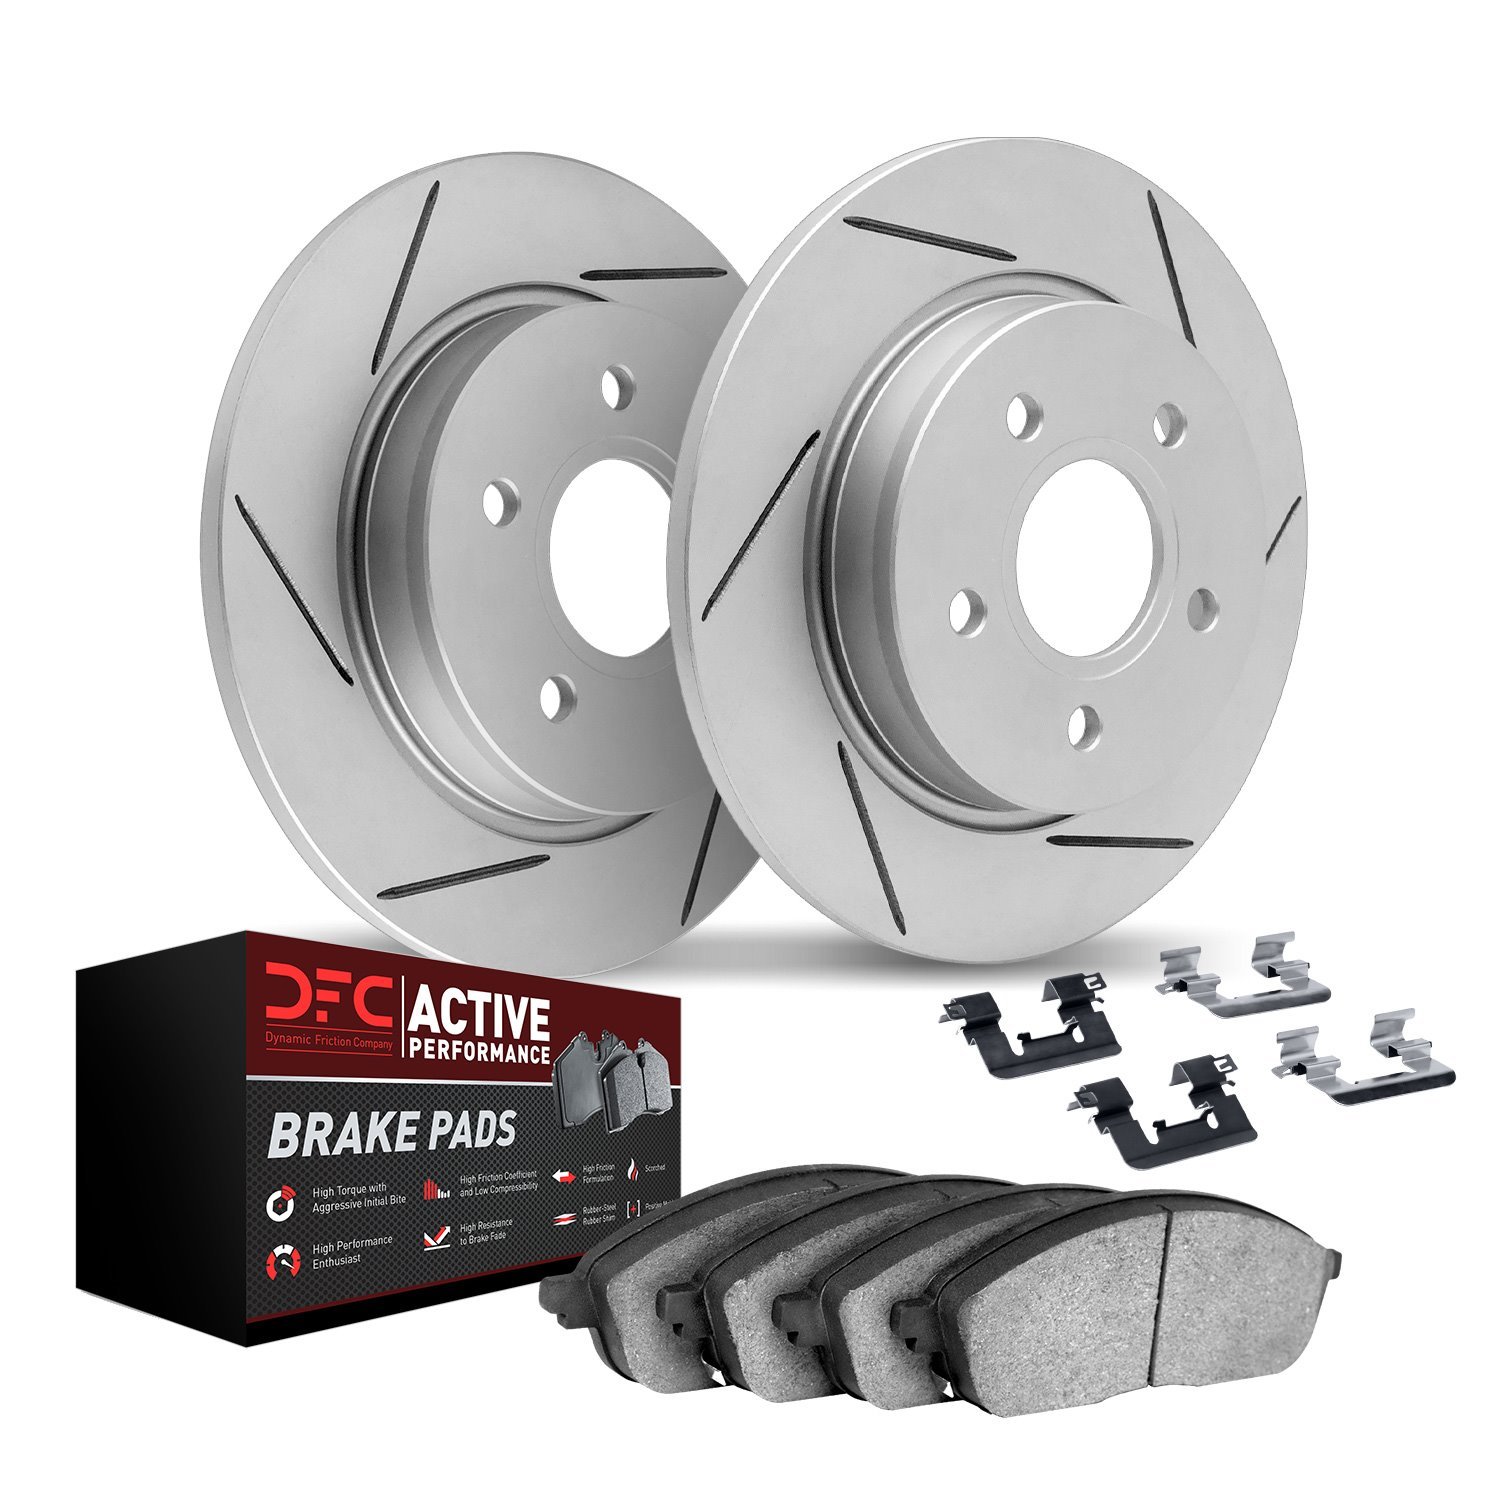 2712-59039 Geoperformance Slotted Brake Rotors with Active Performance Pads Kits & Hardware, 1997-2015 Acura/Honda, Position: Re